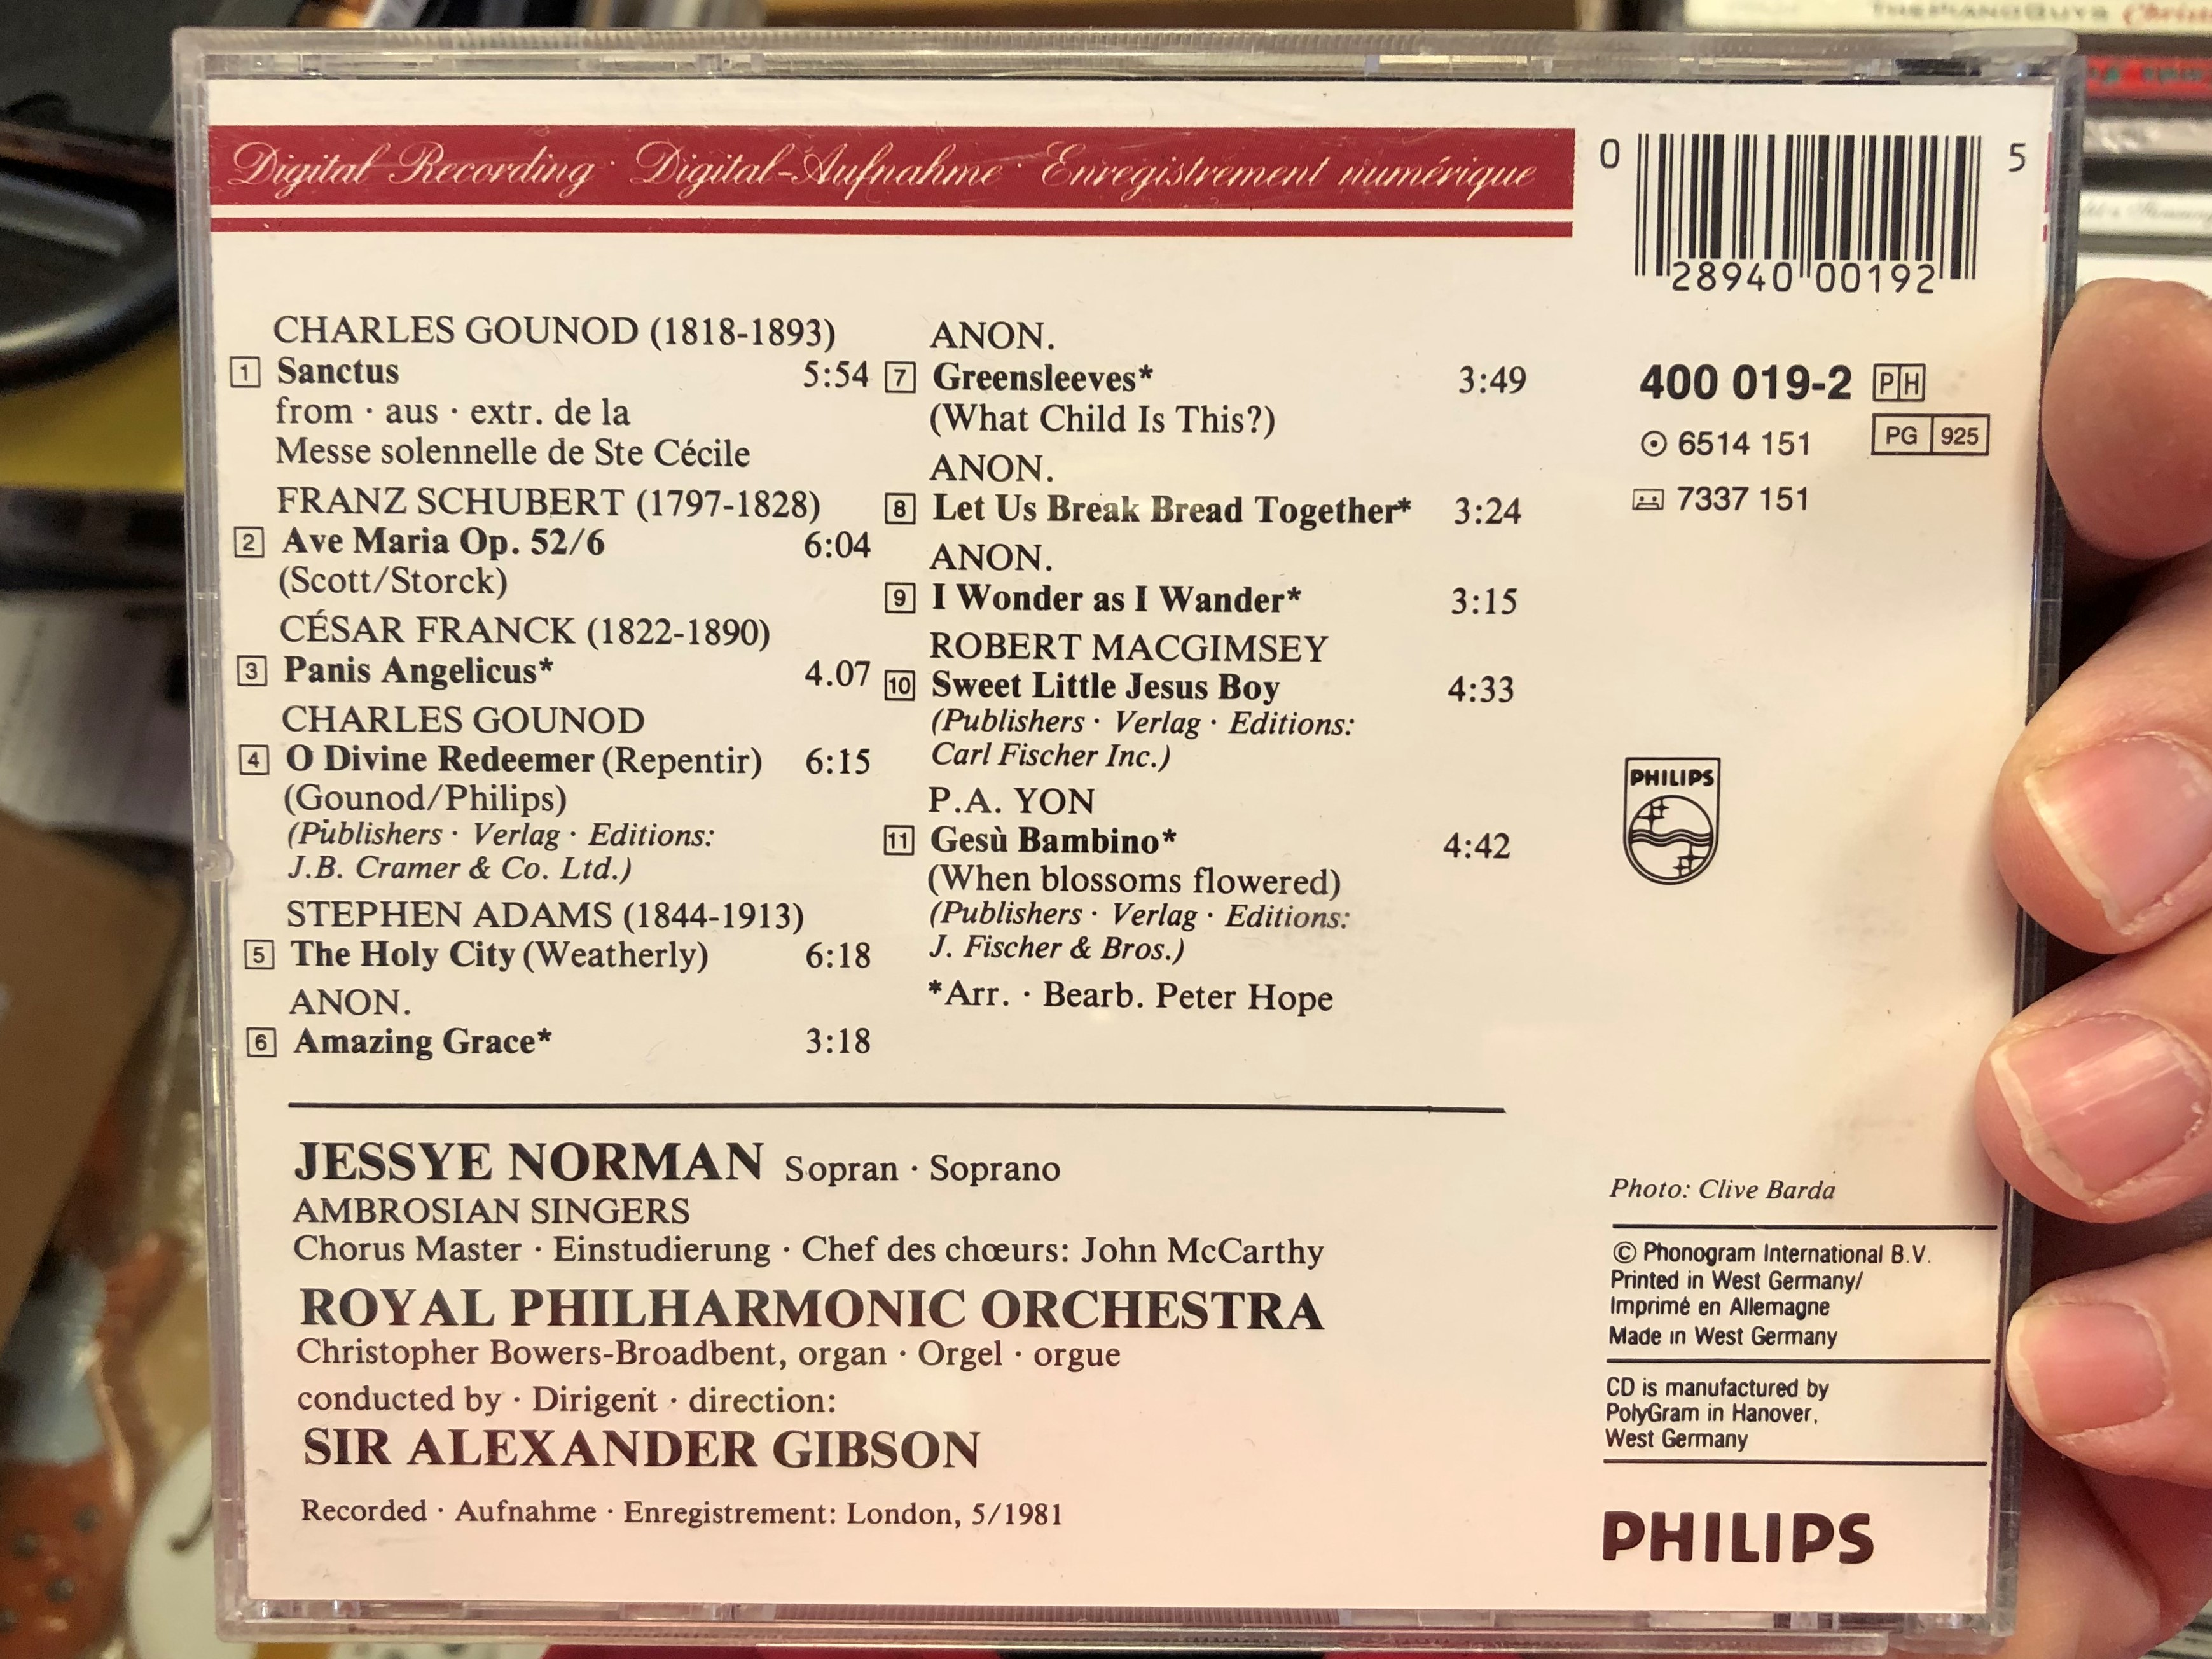 jessye-norman-sacred-songs-ave-maria-greensleeves-the-holy-city-sanctus-amazing-grace-ambrosian-singers-royal-philharmonic-orchestra-alexander-gibson-philips-audio-cd-400-019-2-.jpg